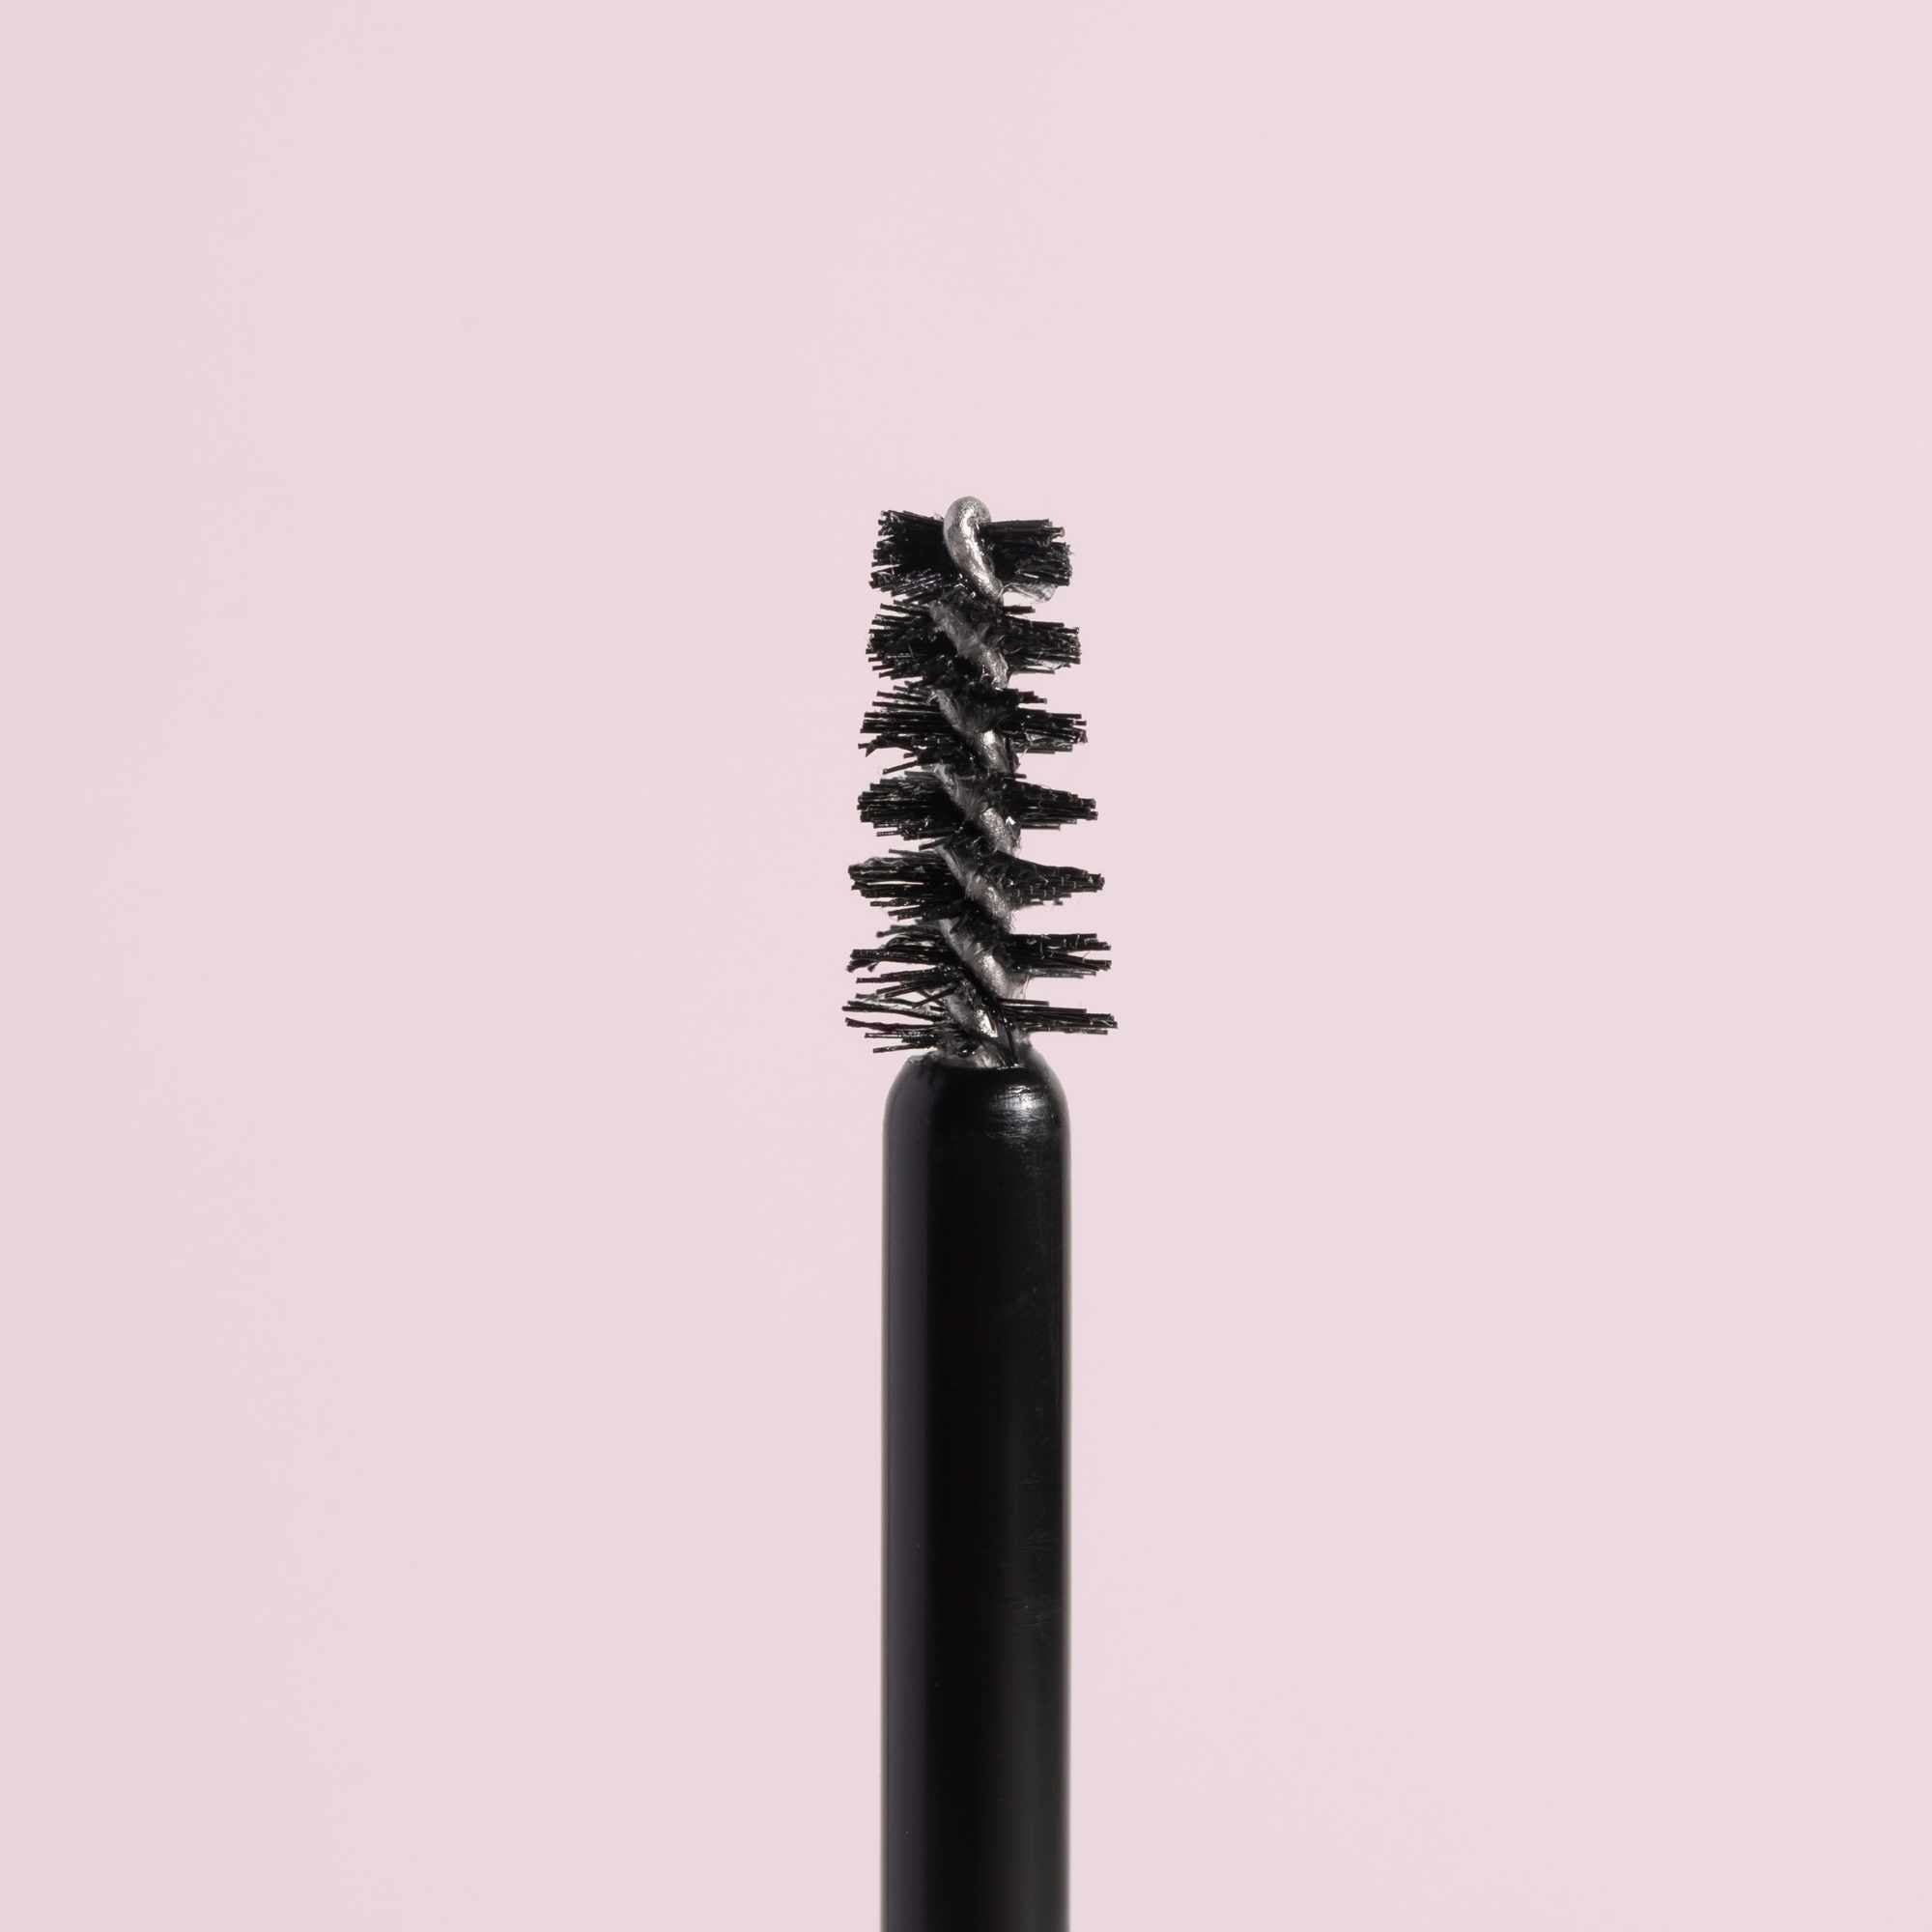 Brow Blowout Shaping Gel